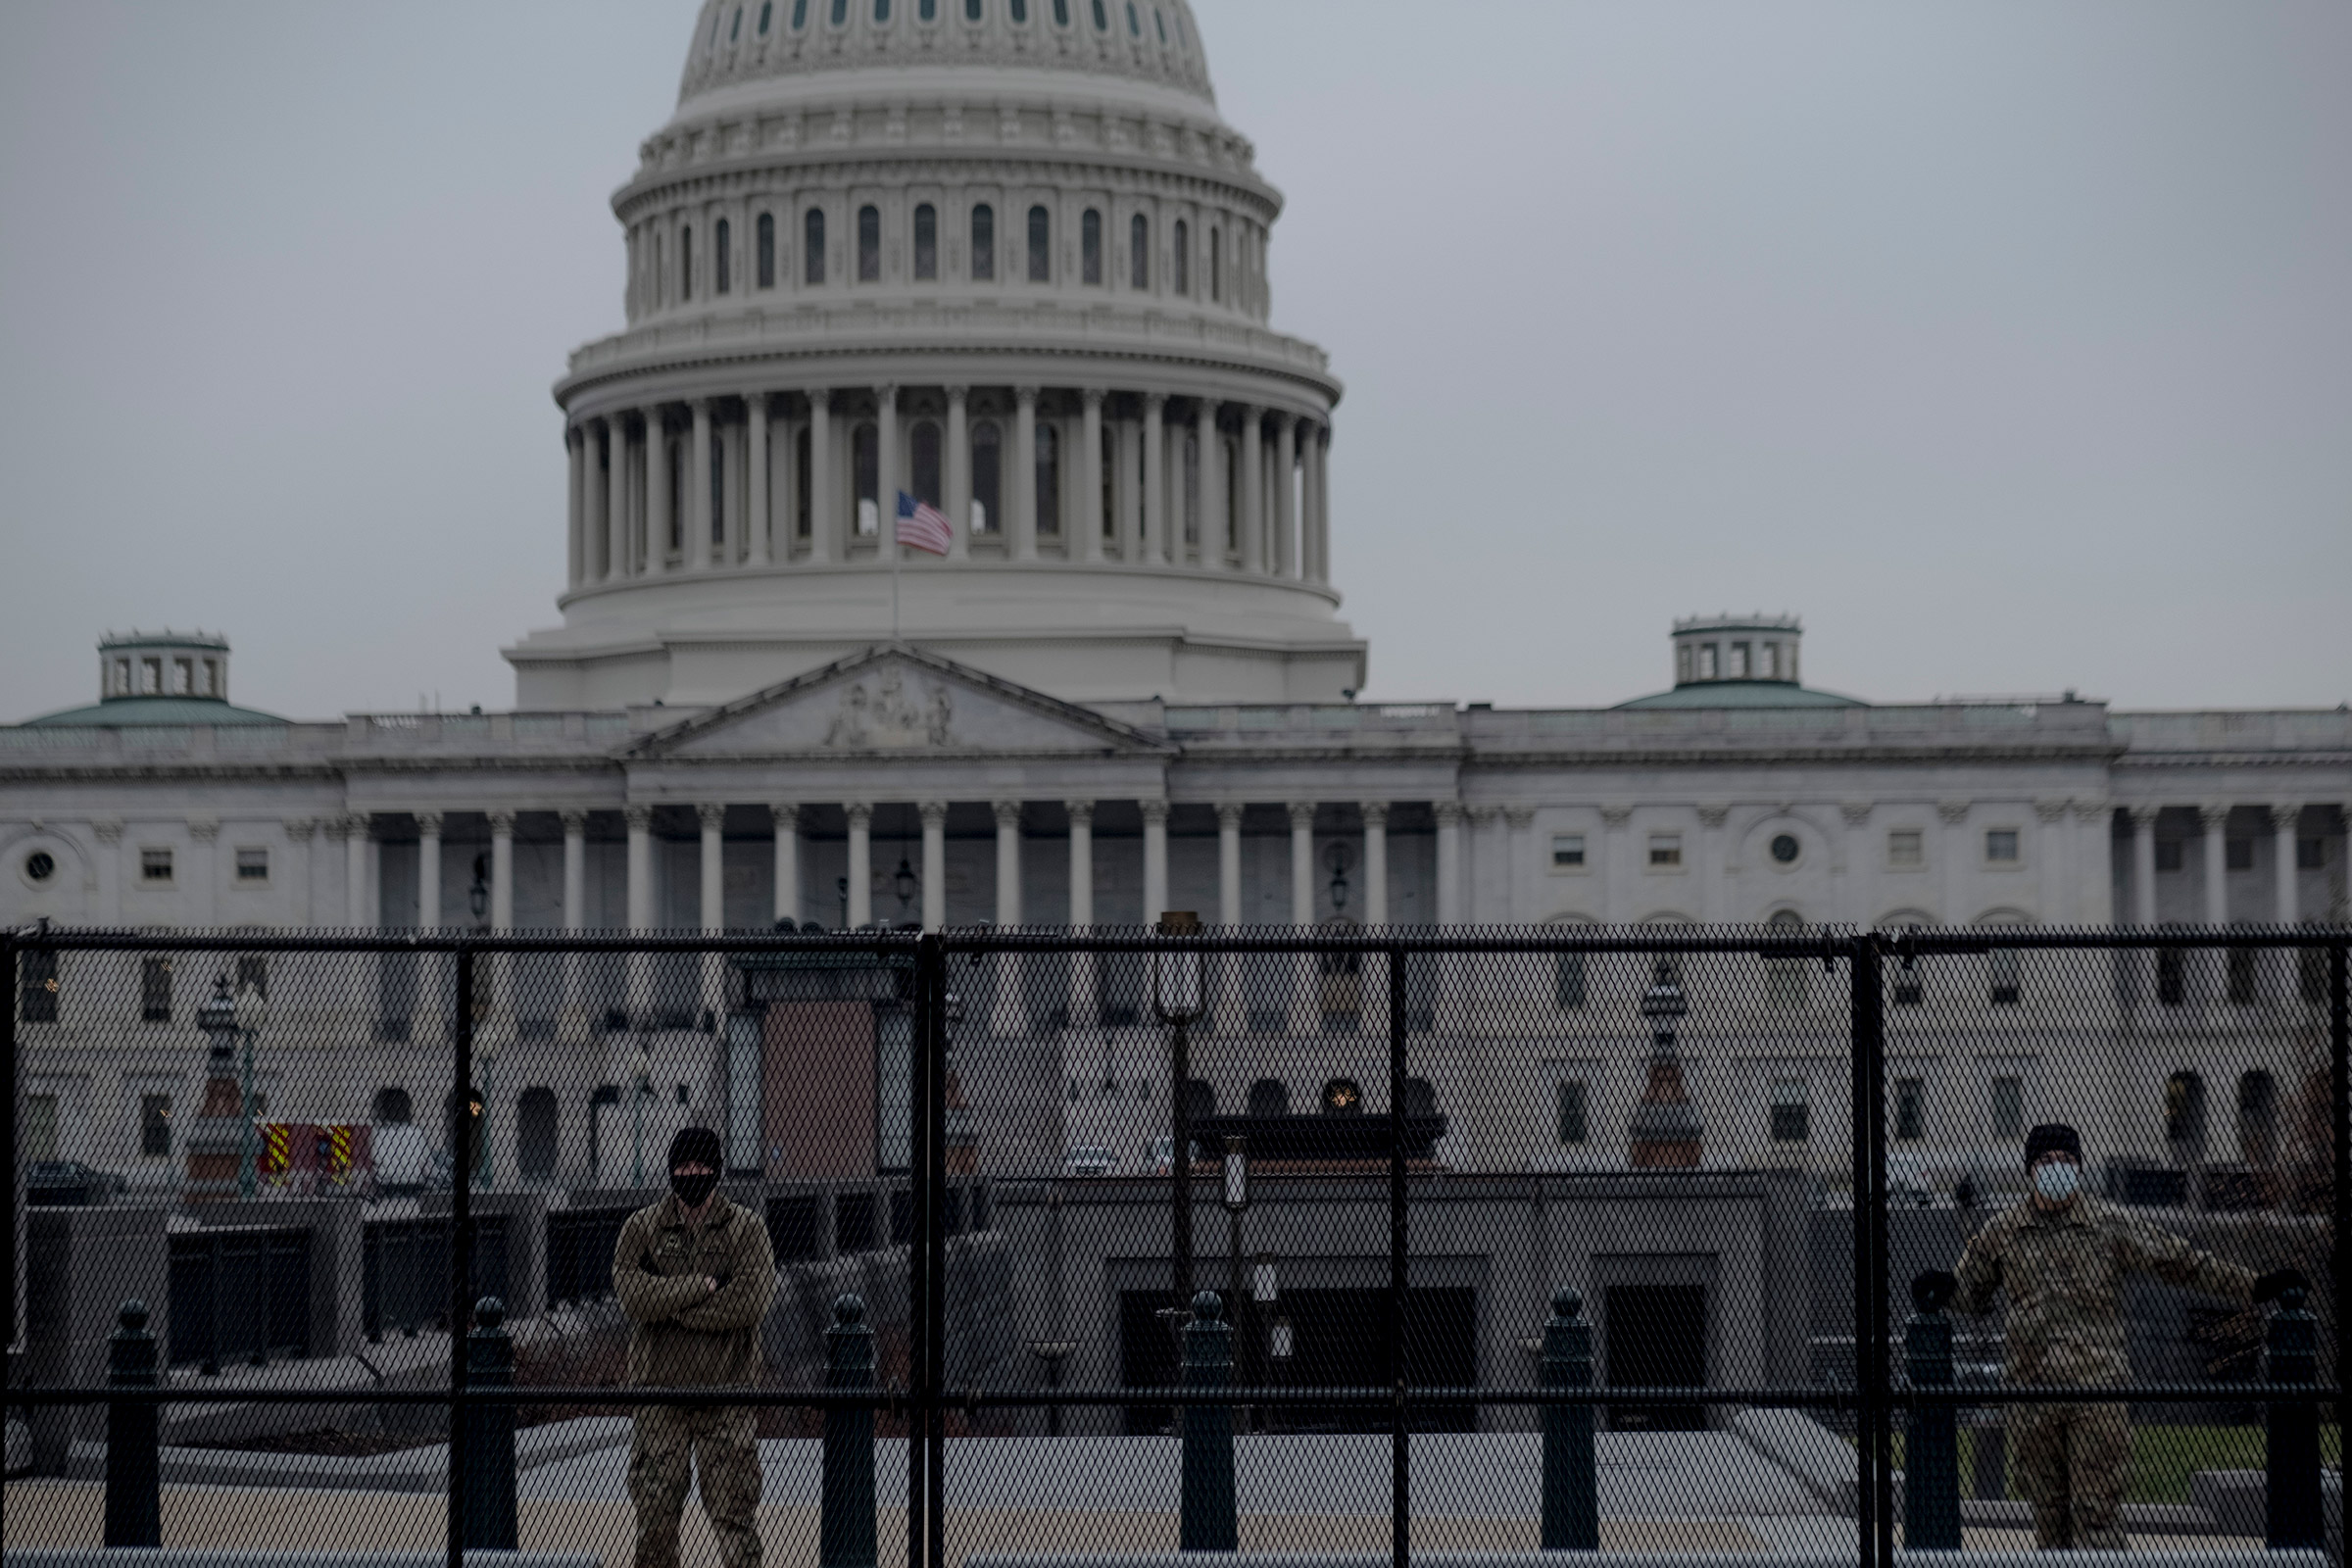 Members of the National Guard form a perimeter around the Capitol in Washington, on Jan. 11, 2020. (Gabriella Demczuk for TIME)